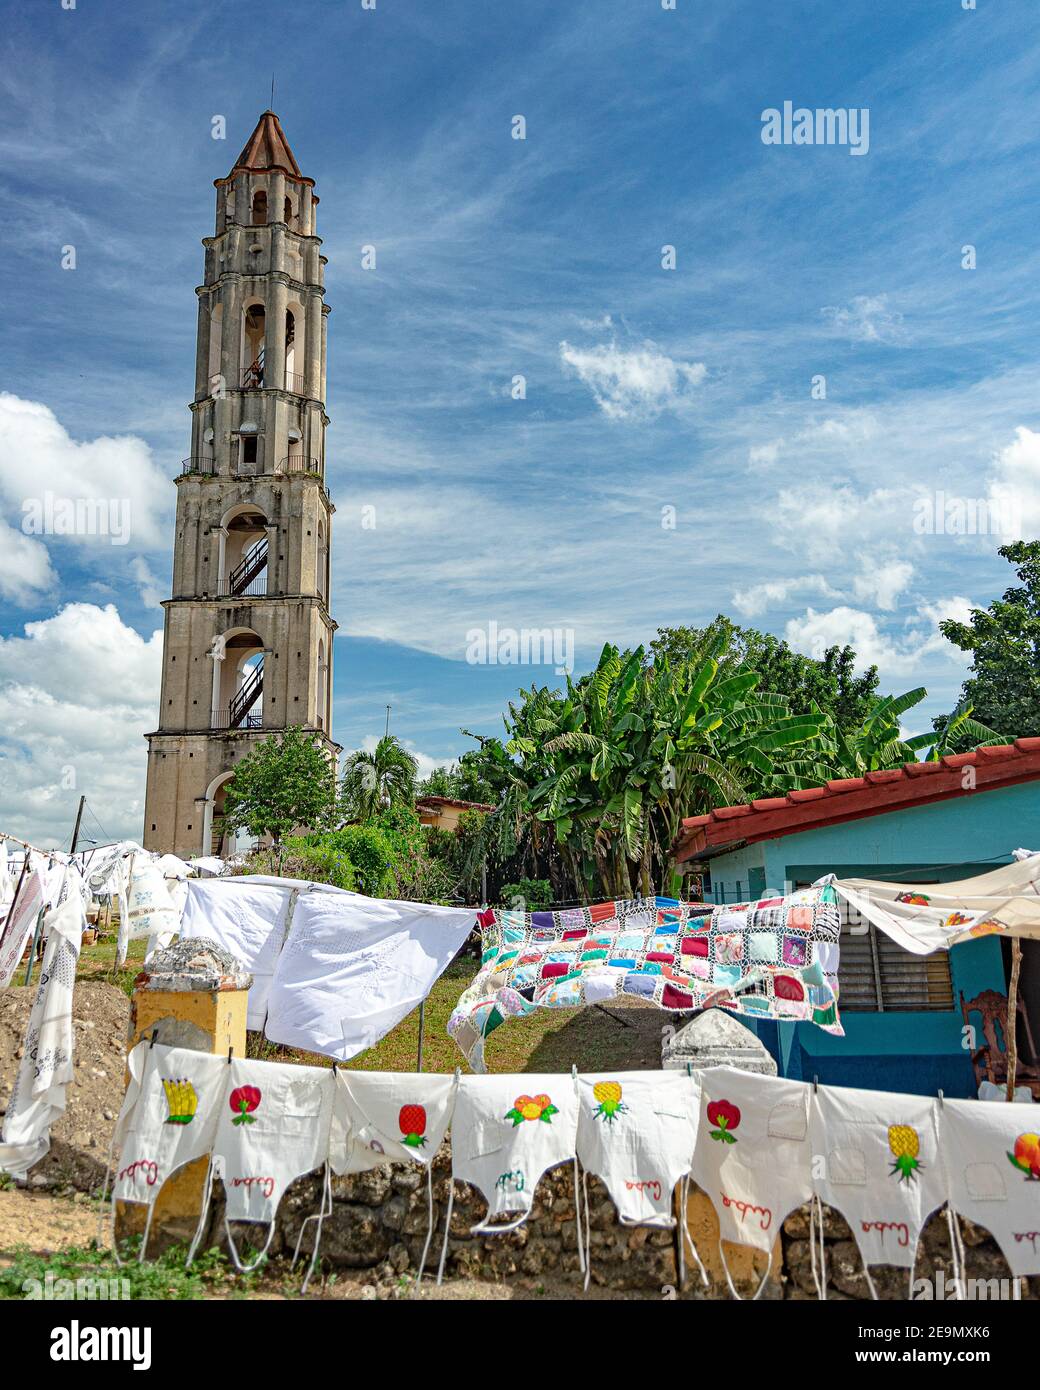 A view of the tower at the Manaca Iznaga estate in the Valley of Sugar Mills outside of Trinidad, Sancti Spíritus, Cuba Stock Photo